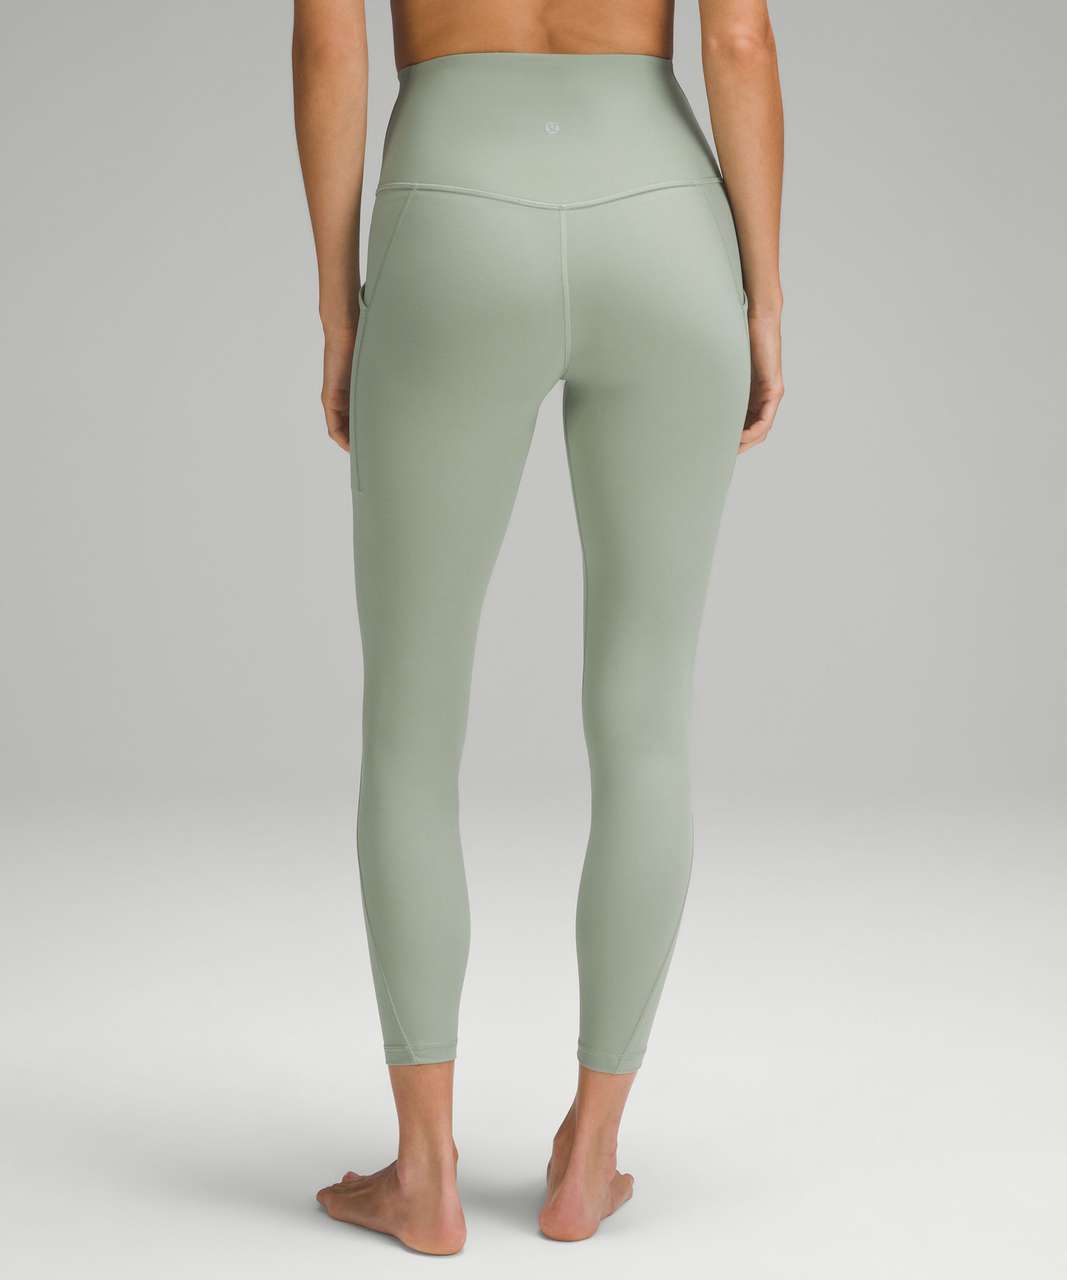 Lululemon Align High-Rise Pant with Pockets 25 - Palm Court